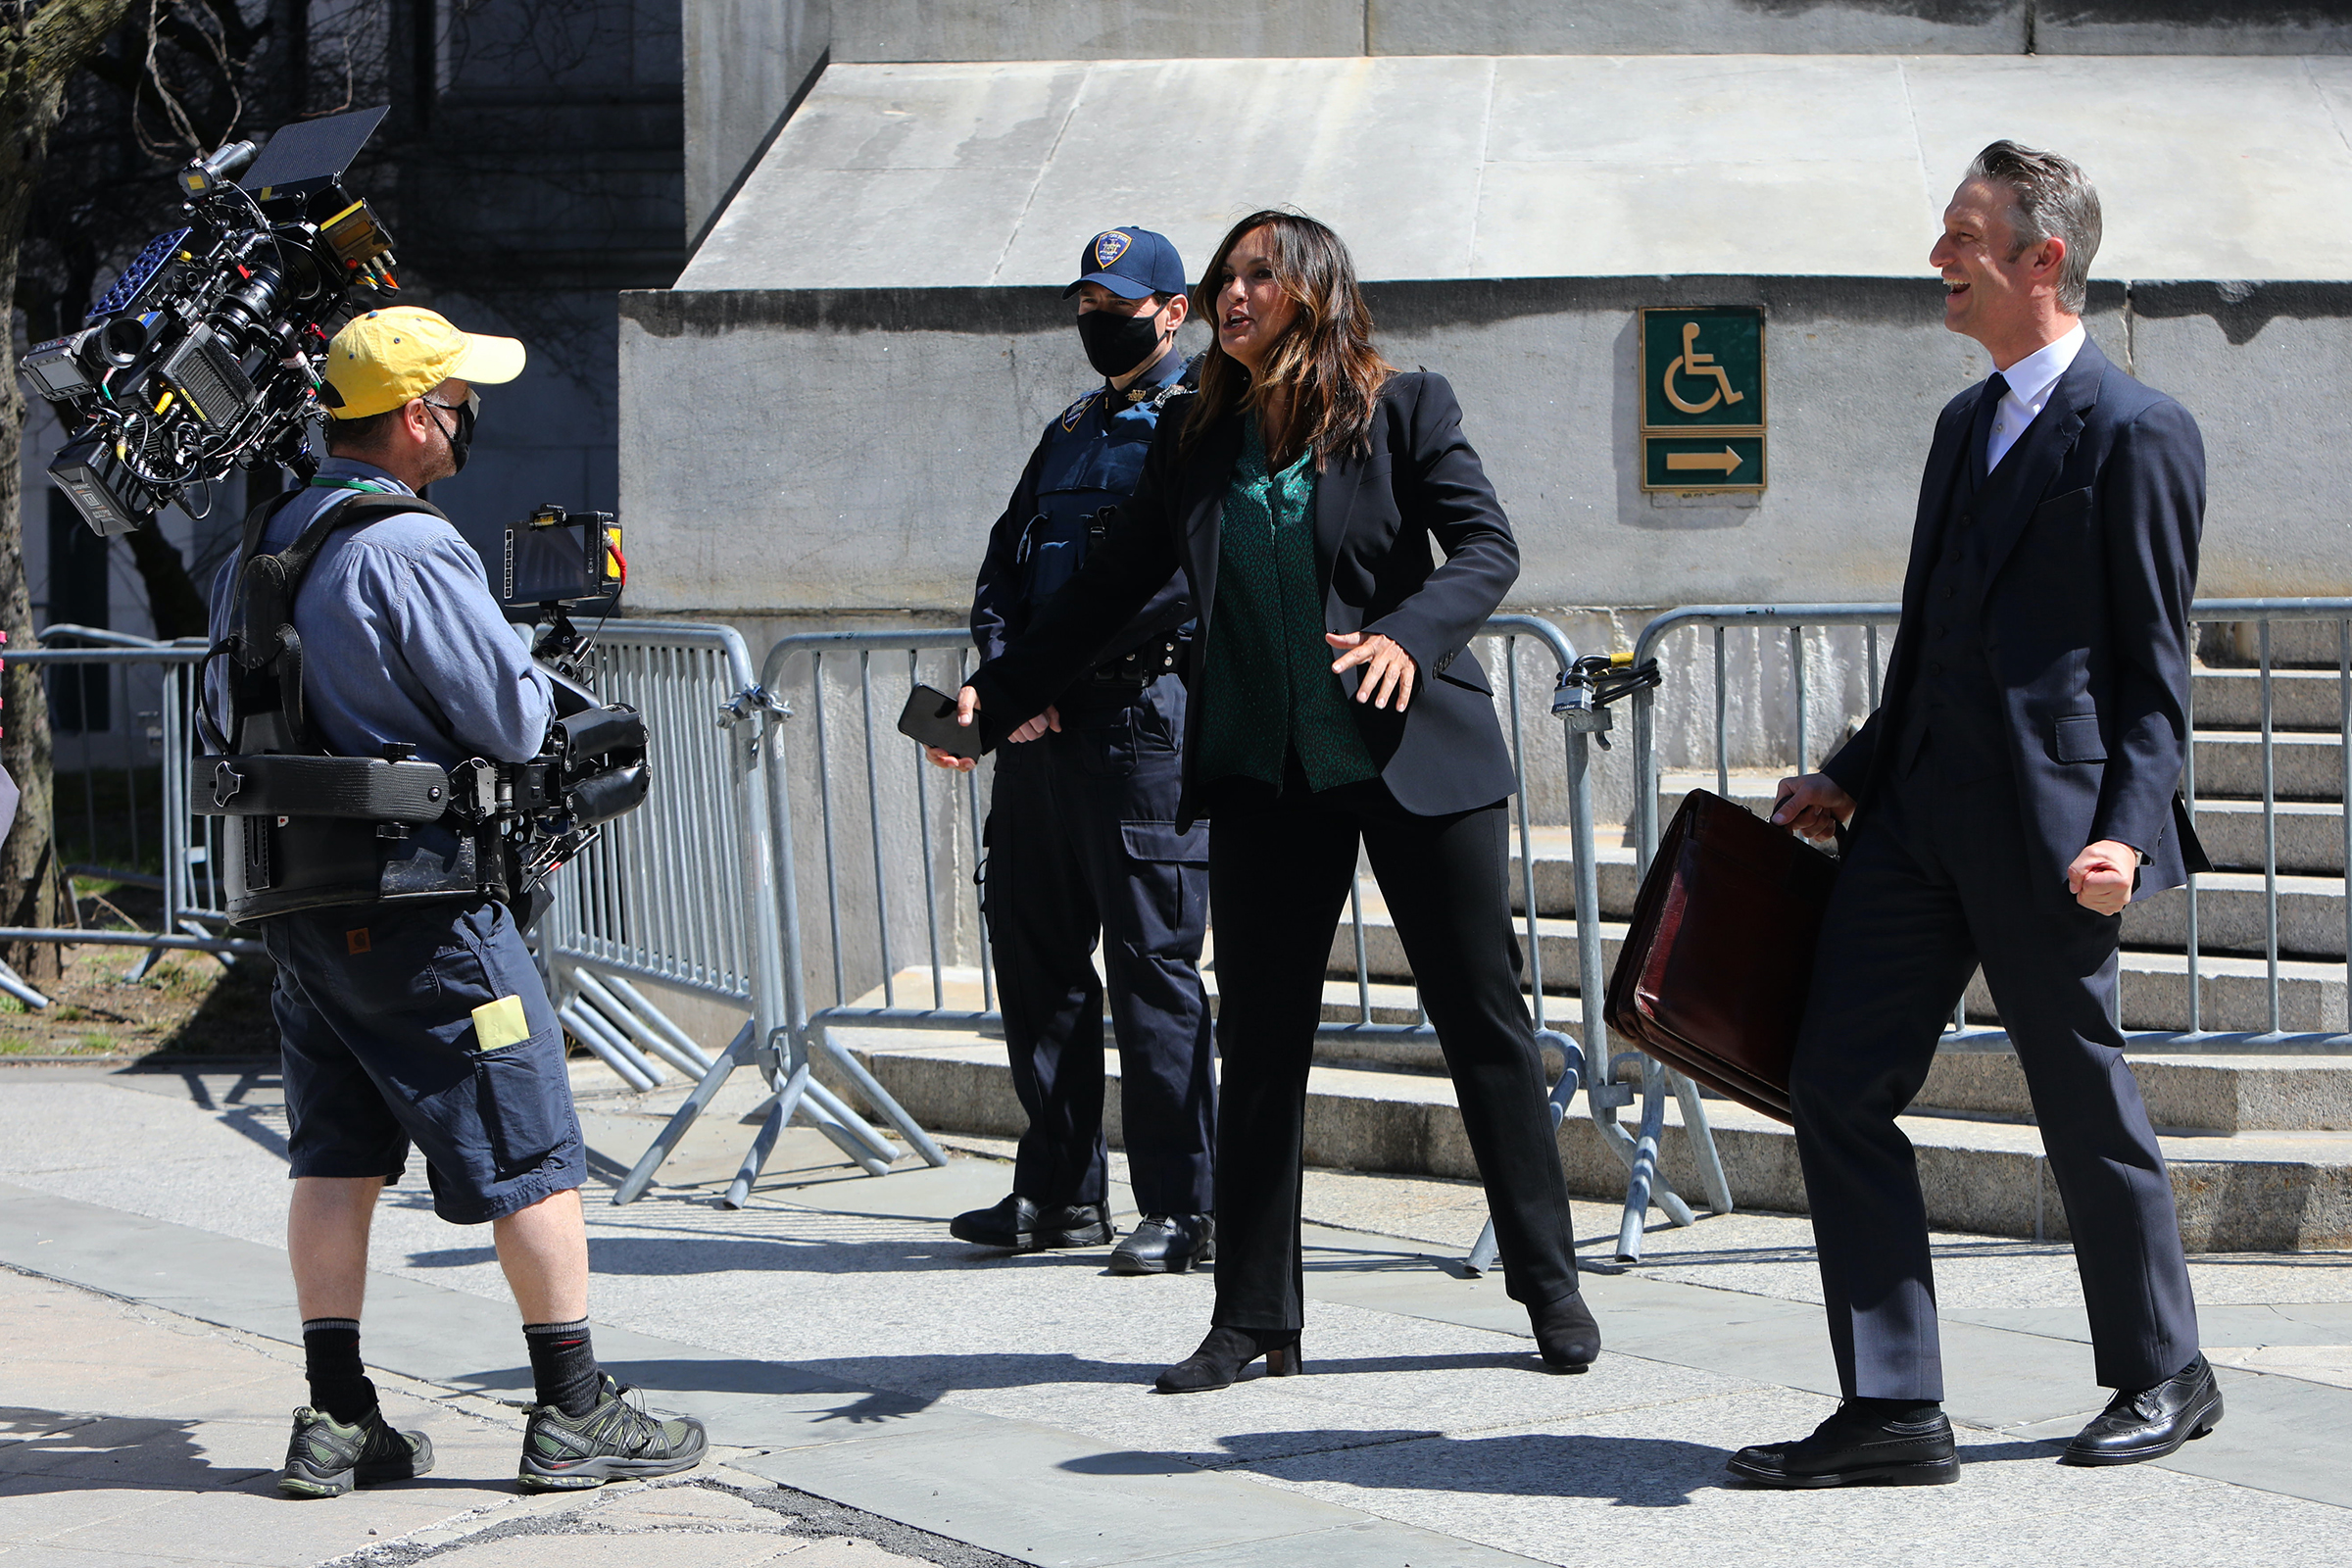 Mariska Hargitay and Peter Scanavino chat with a cameraman on the set of "Law and Order: Special Victims Unit" in 2021 